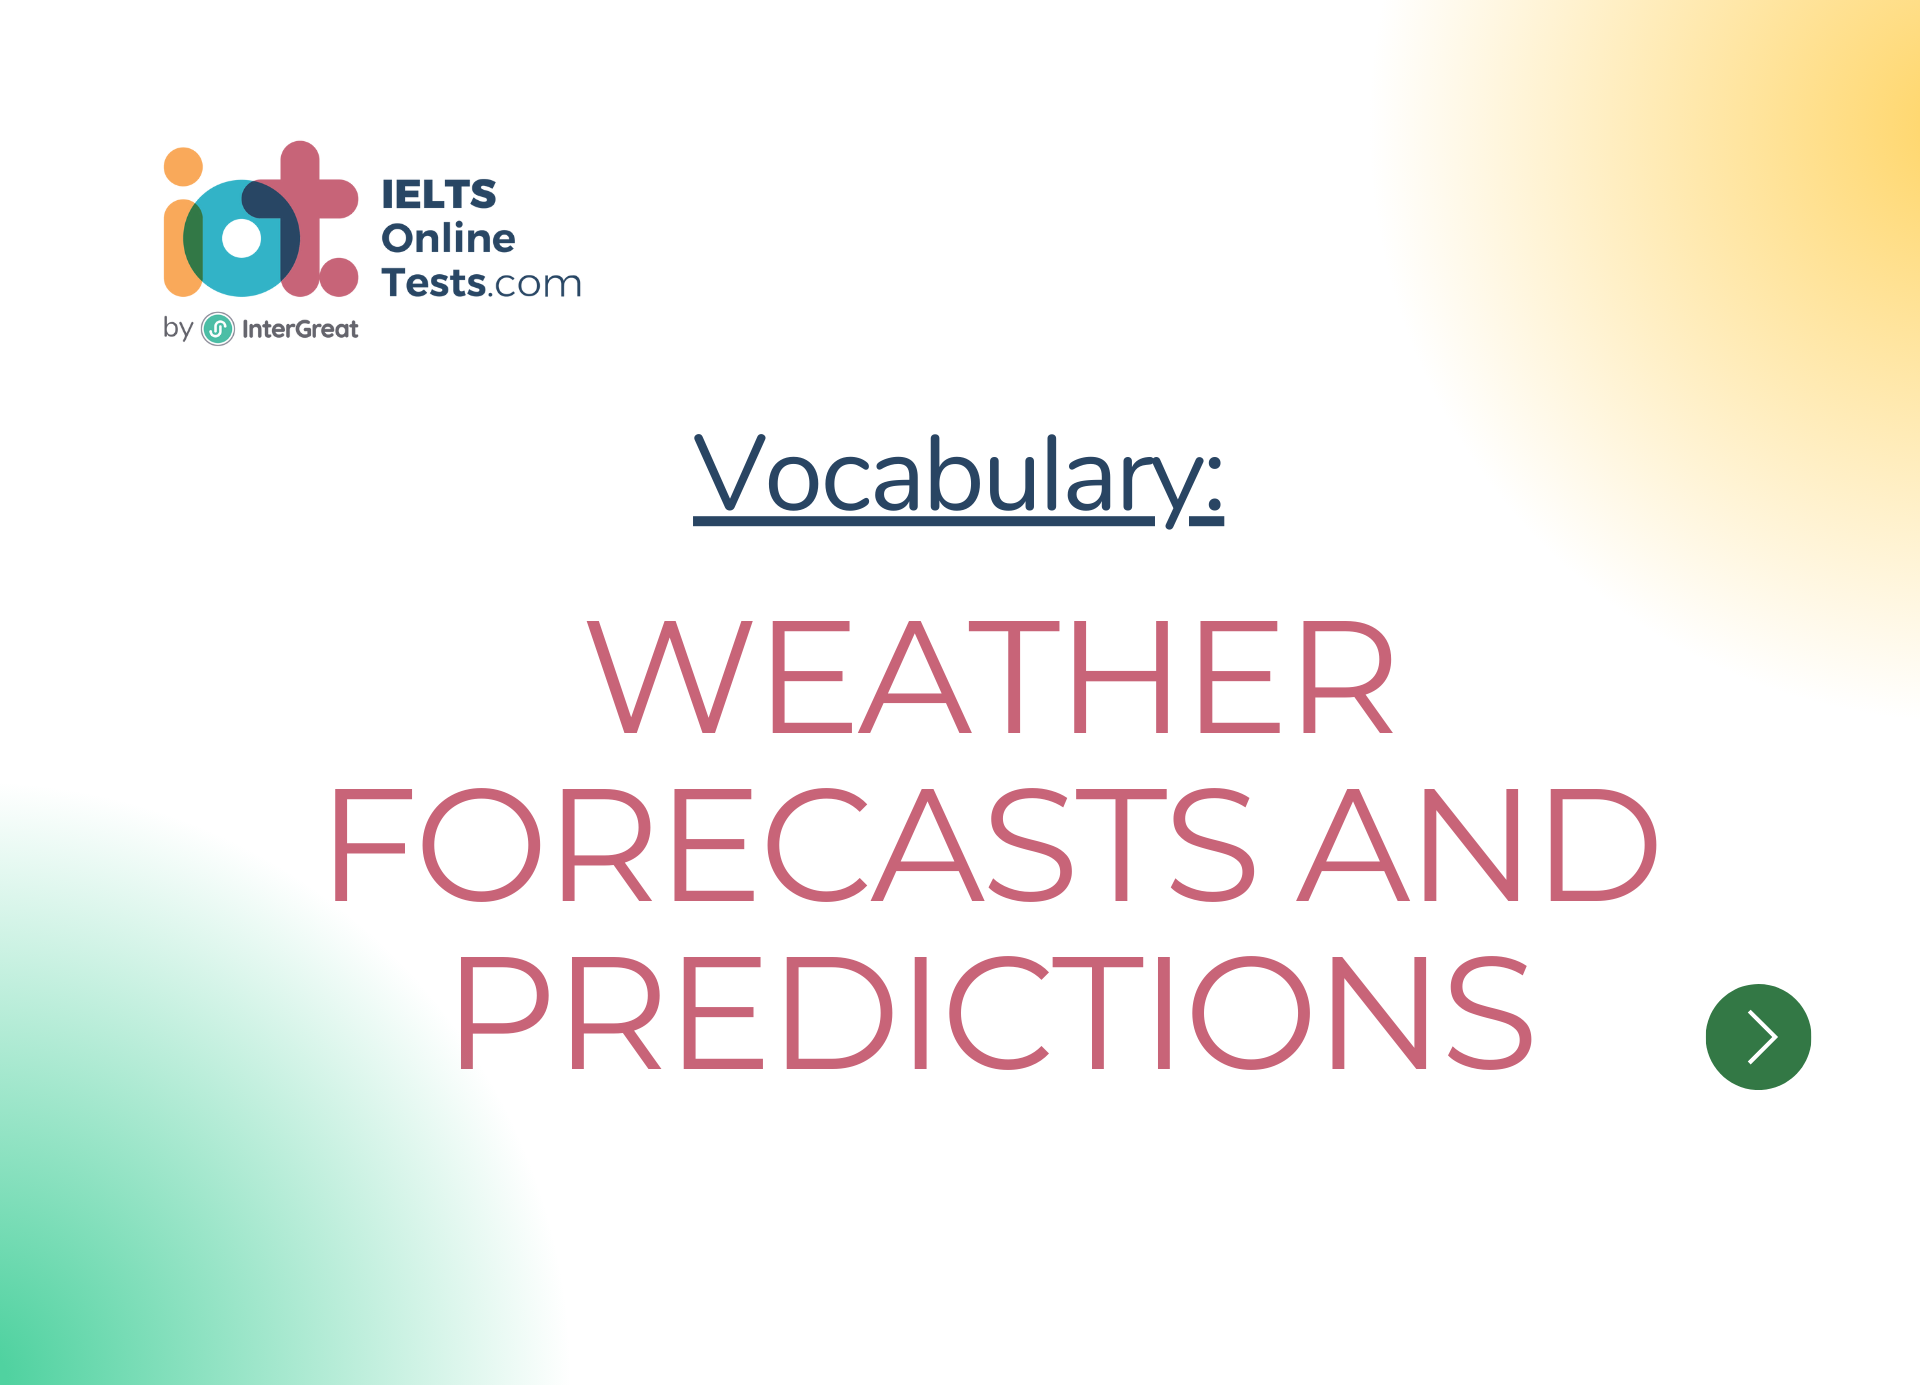 Weather forecasts and predictions